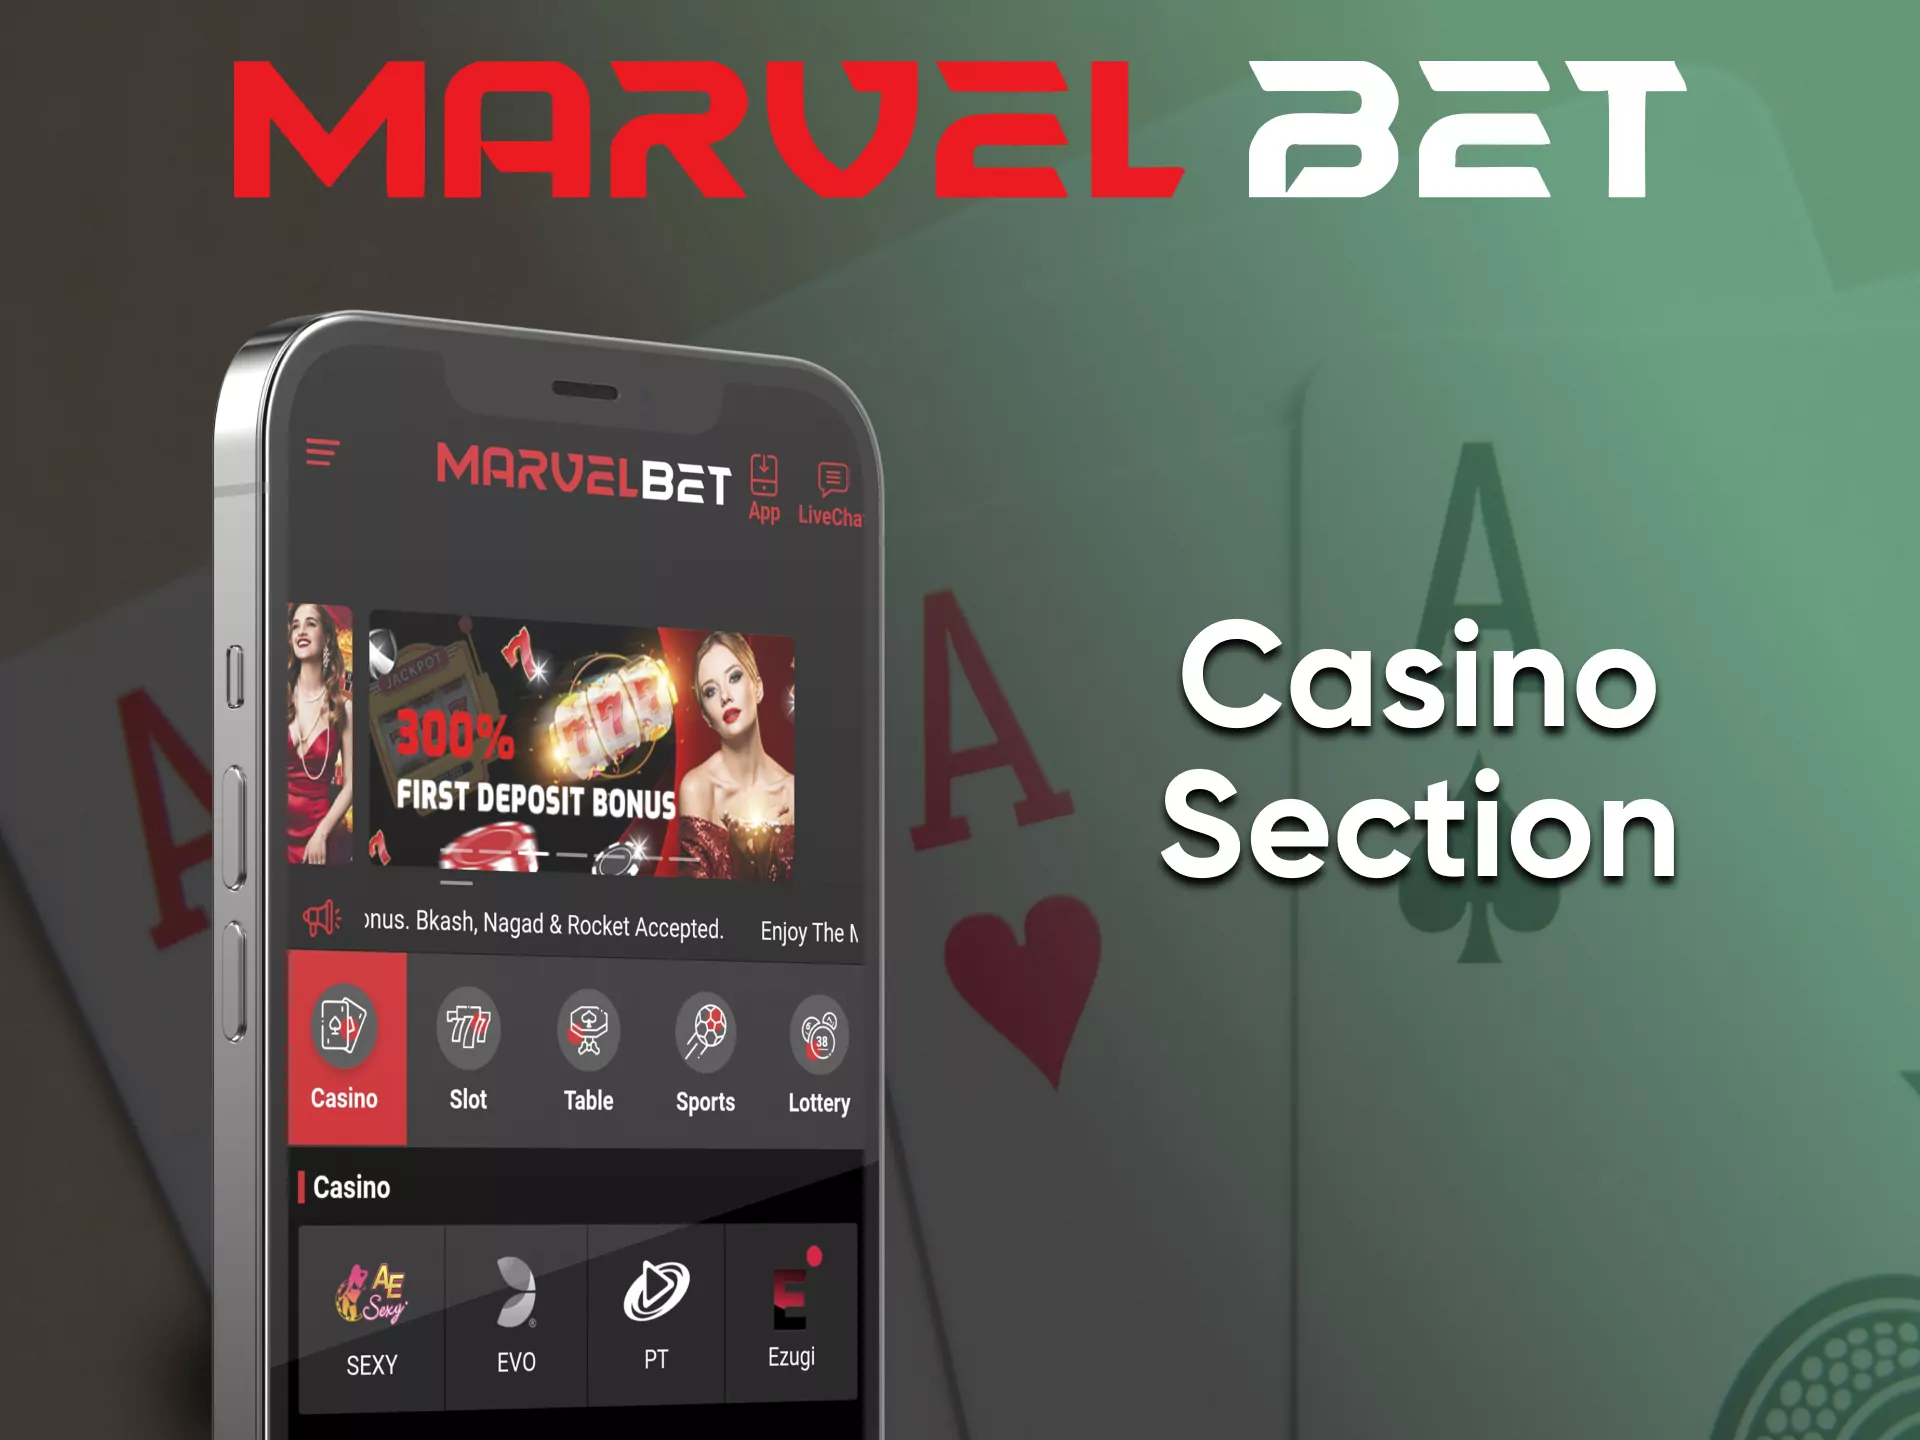 Go to the right section for casino games from Marvelbet.